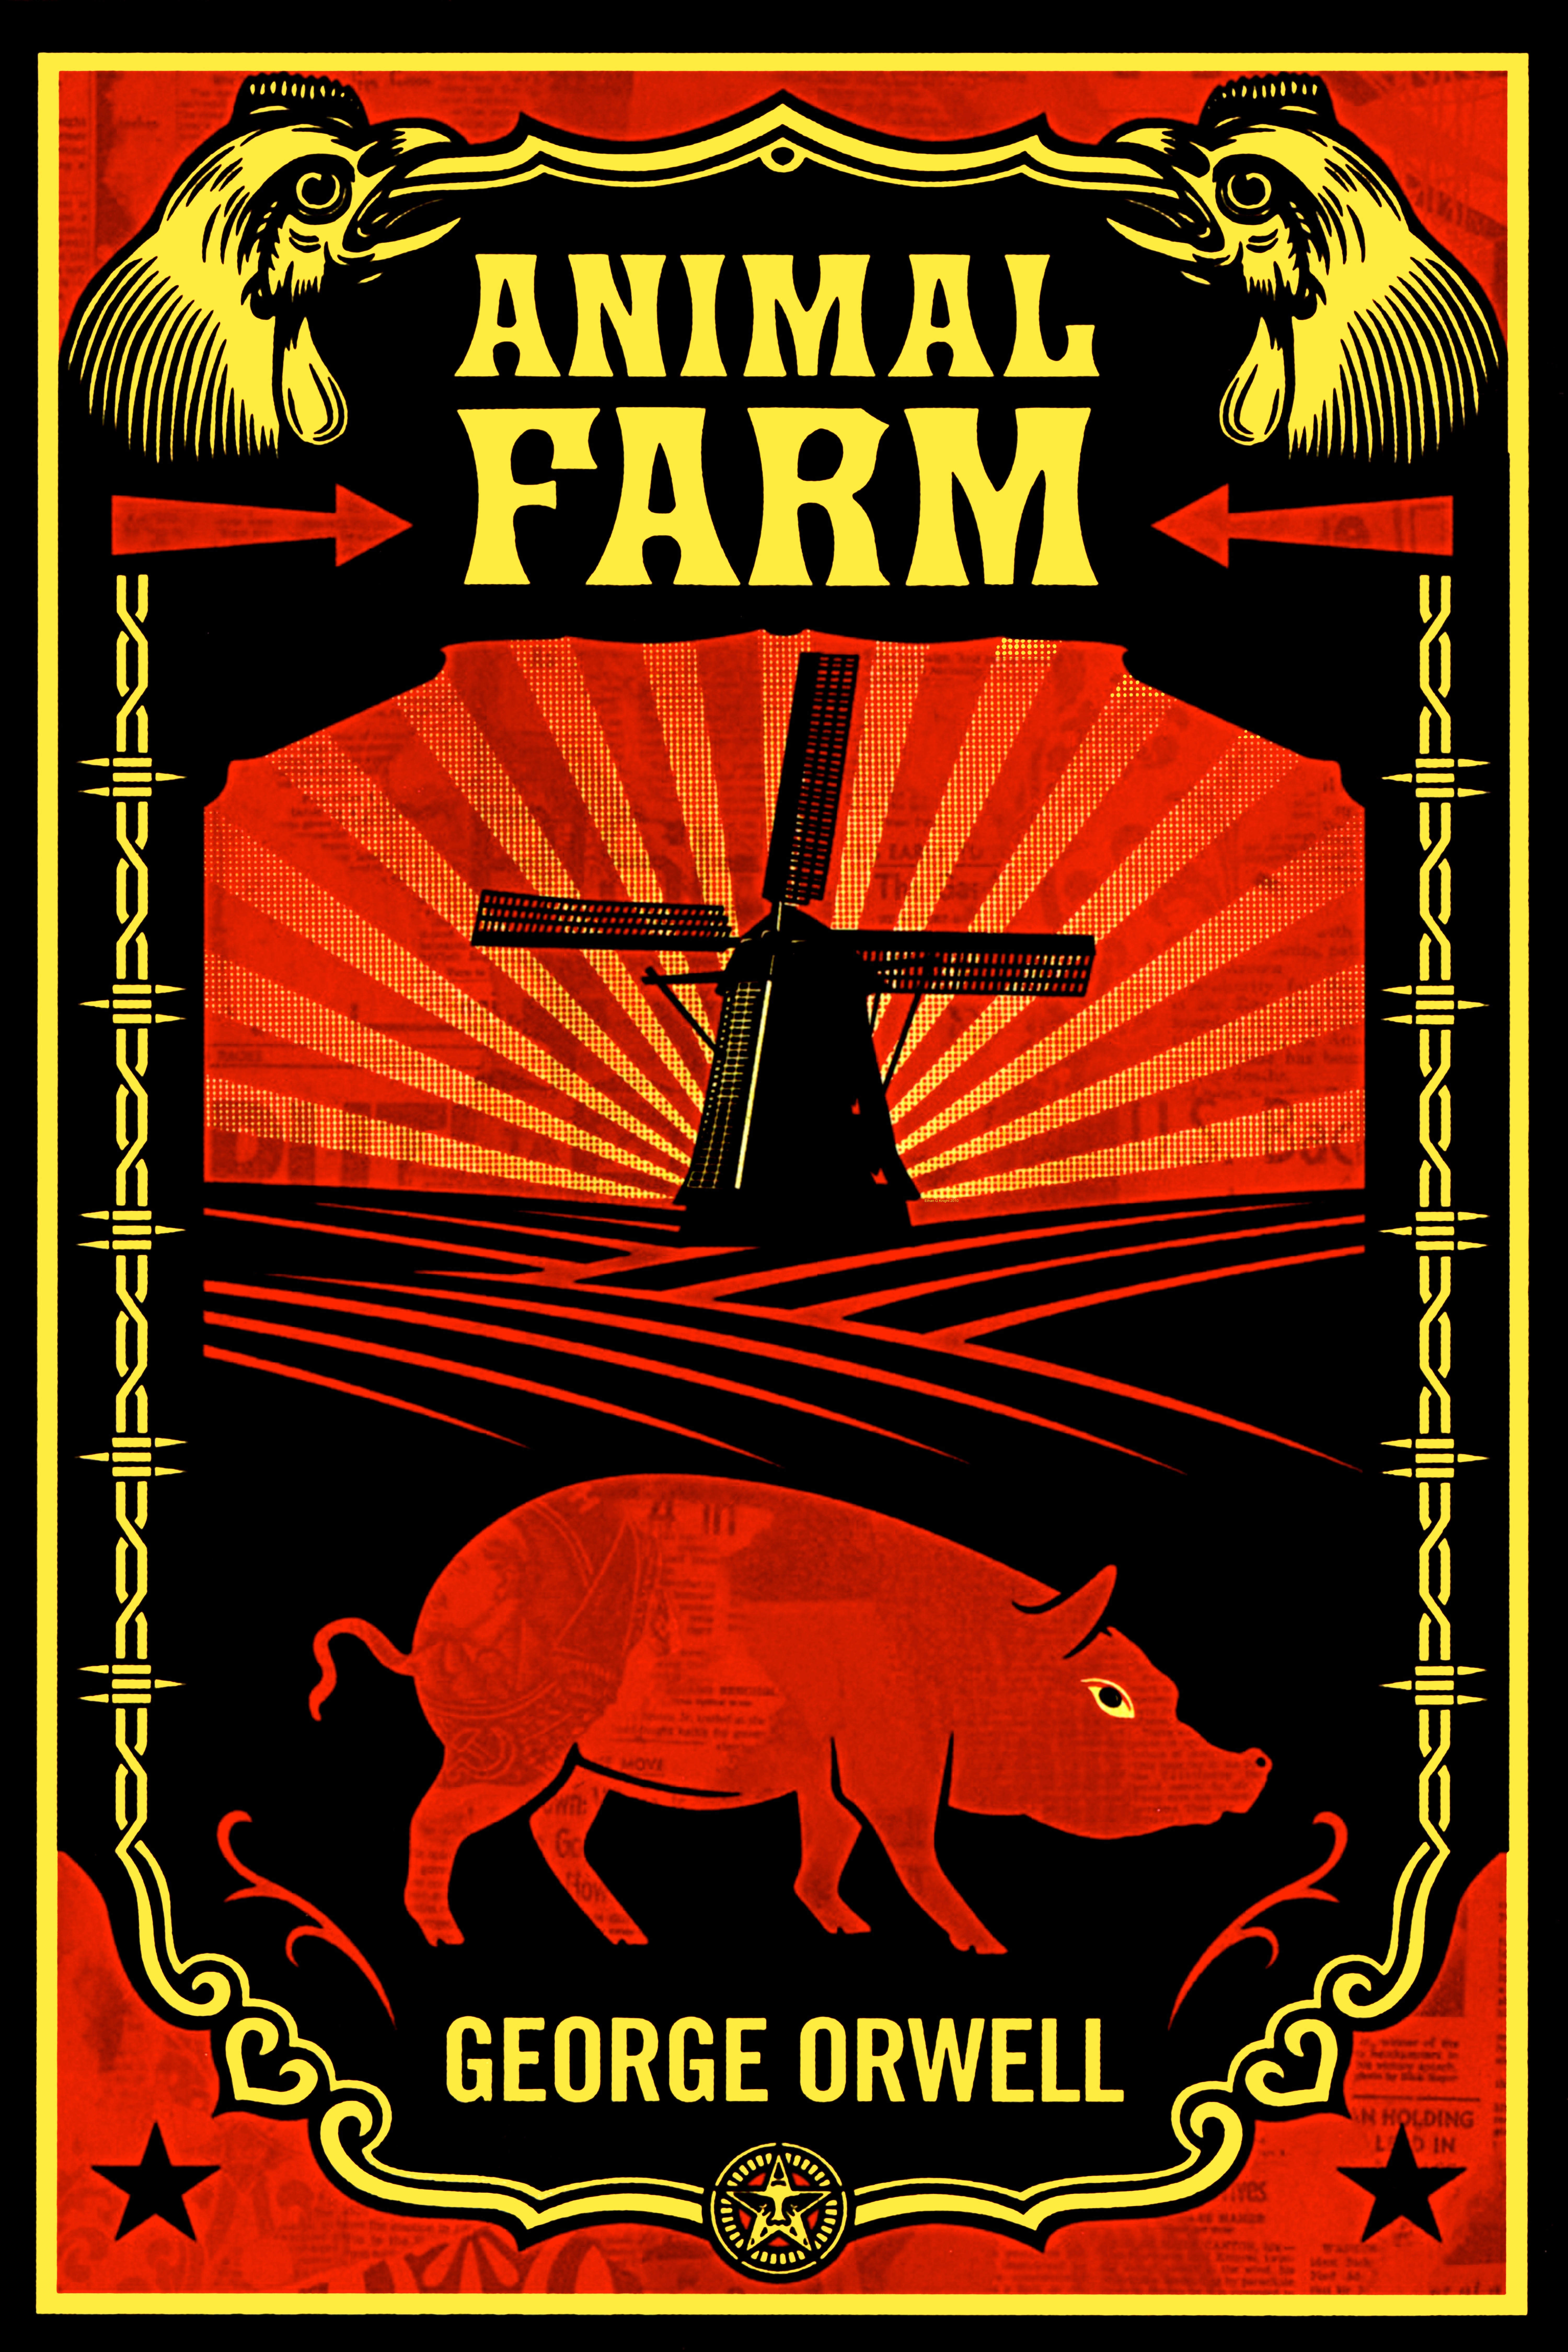 A literary analysis of stalinism in animal farm by george orwell